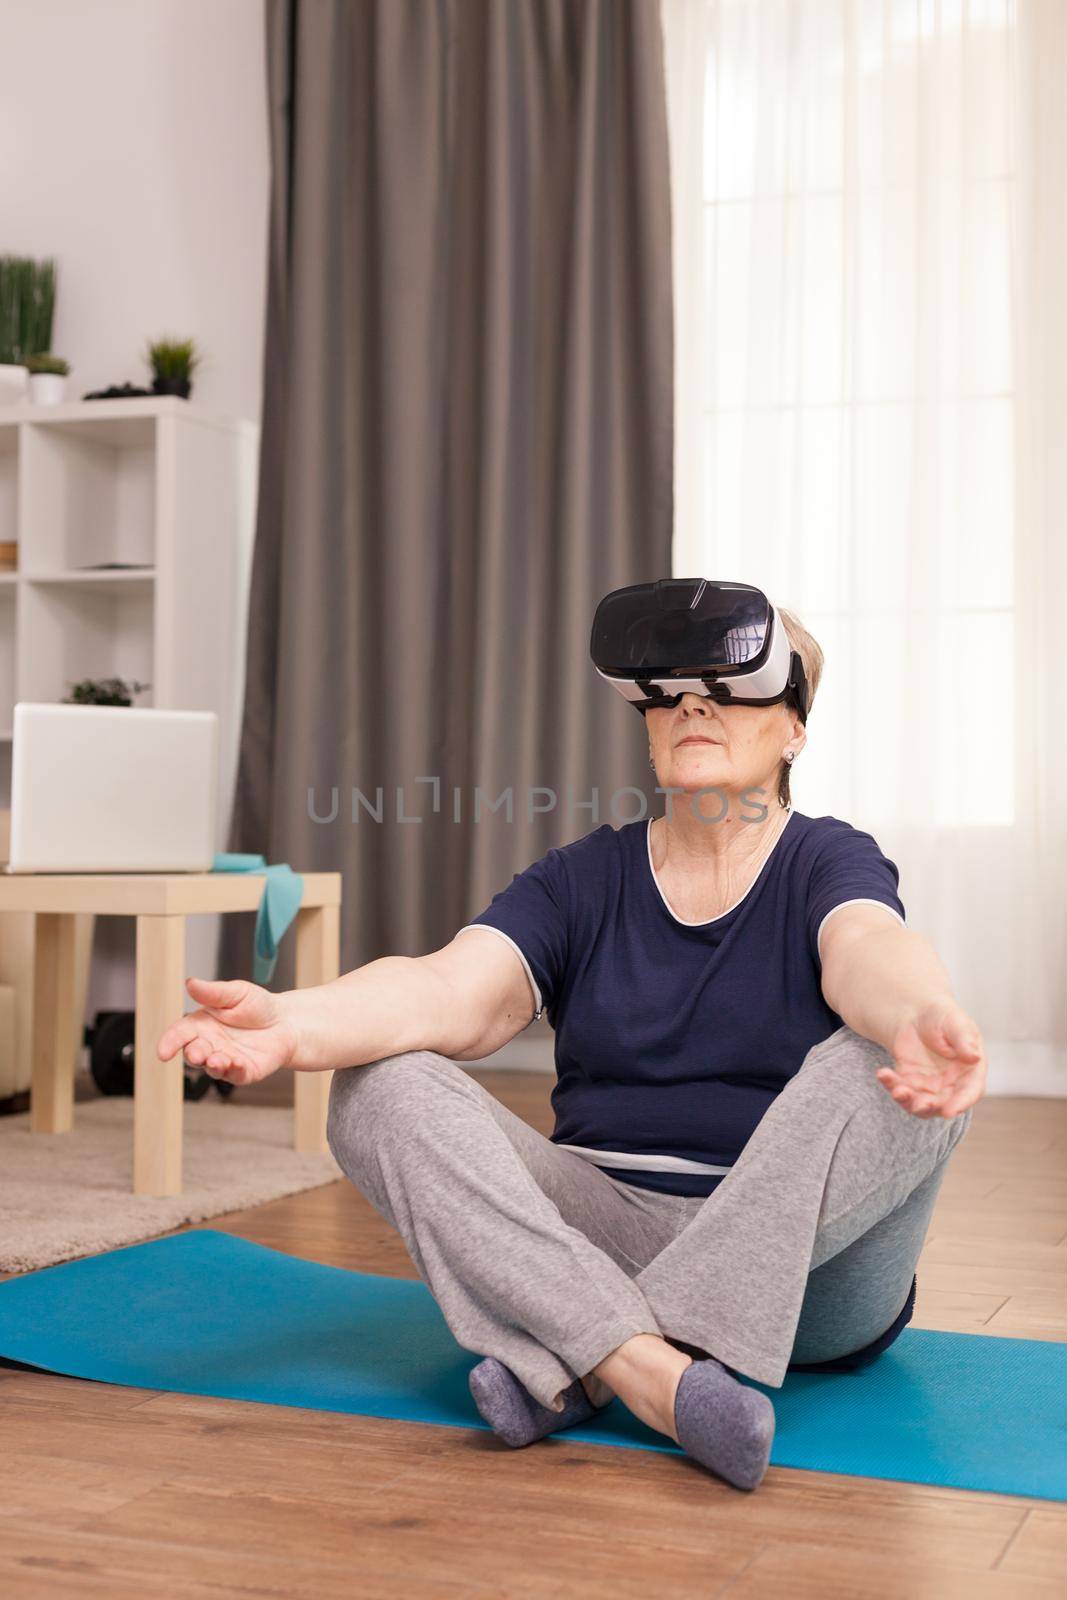 Senior woman using VR headset during yoga exercise. Old person pensioner online internet exercise training at home sport activity with dumbbell, resistance band, swiss ball and VR headset at elderly retirement age